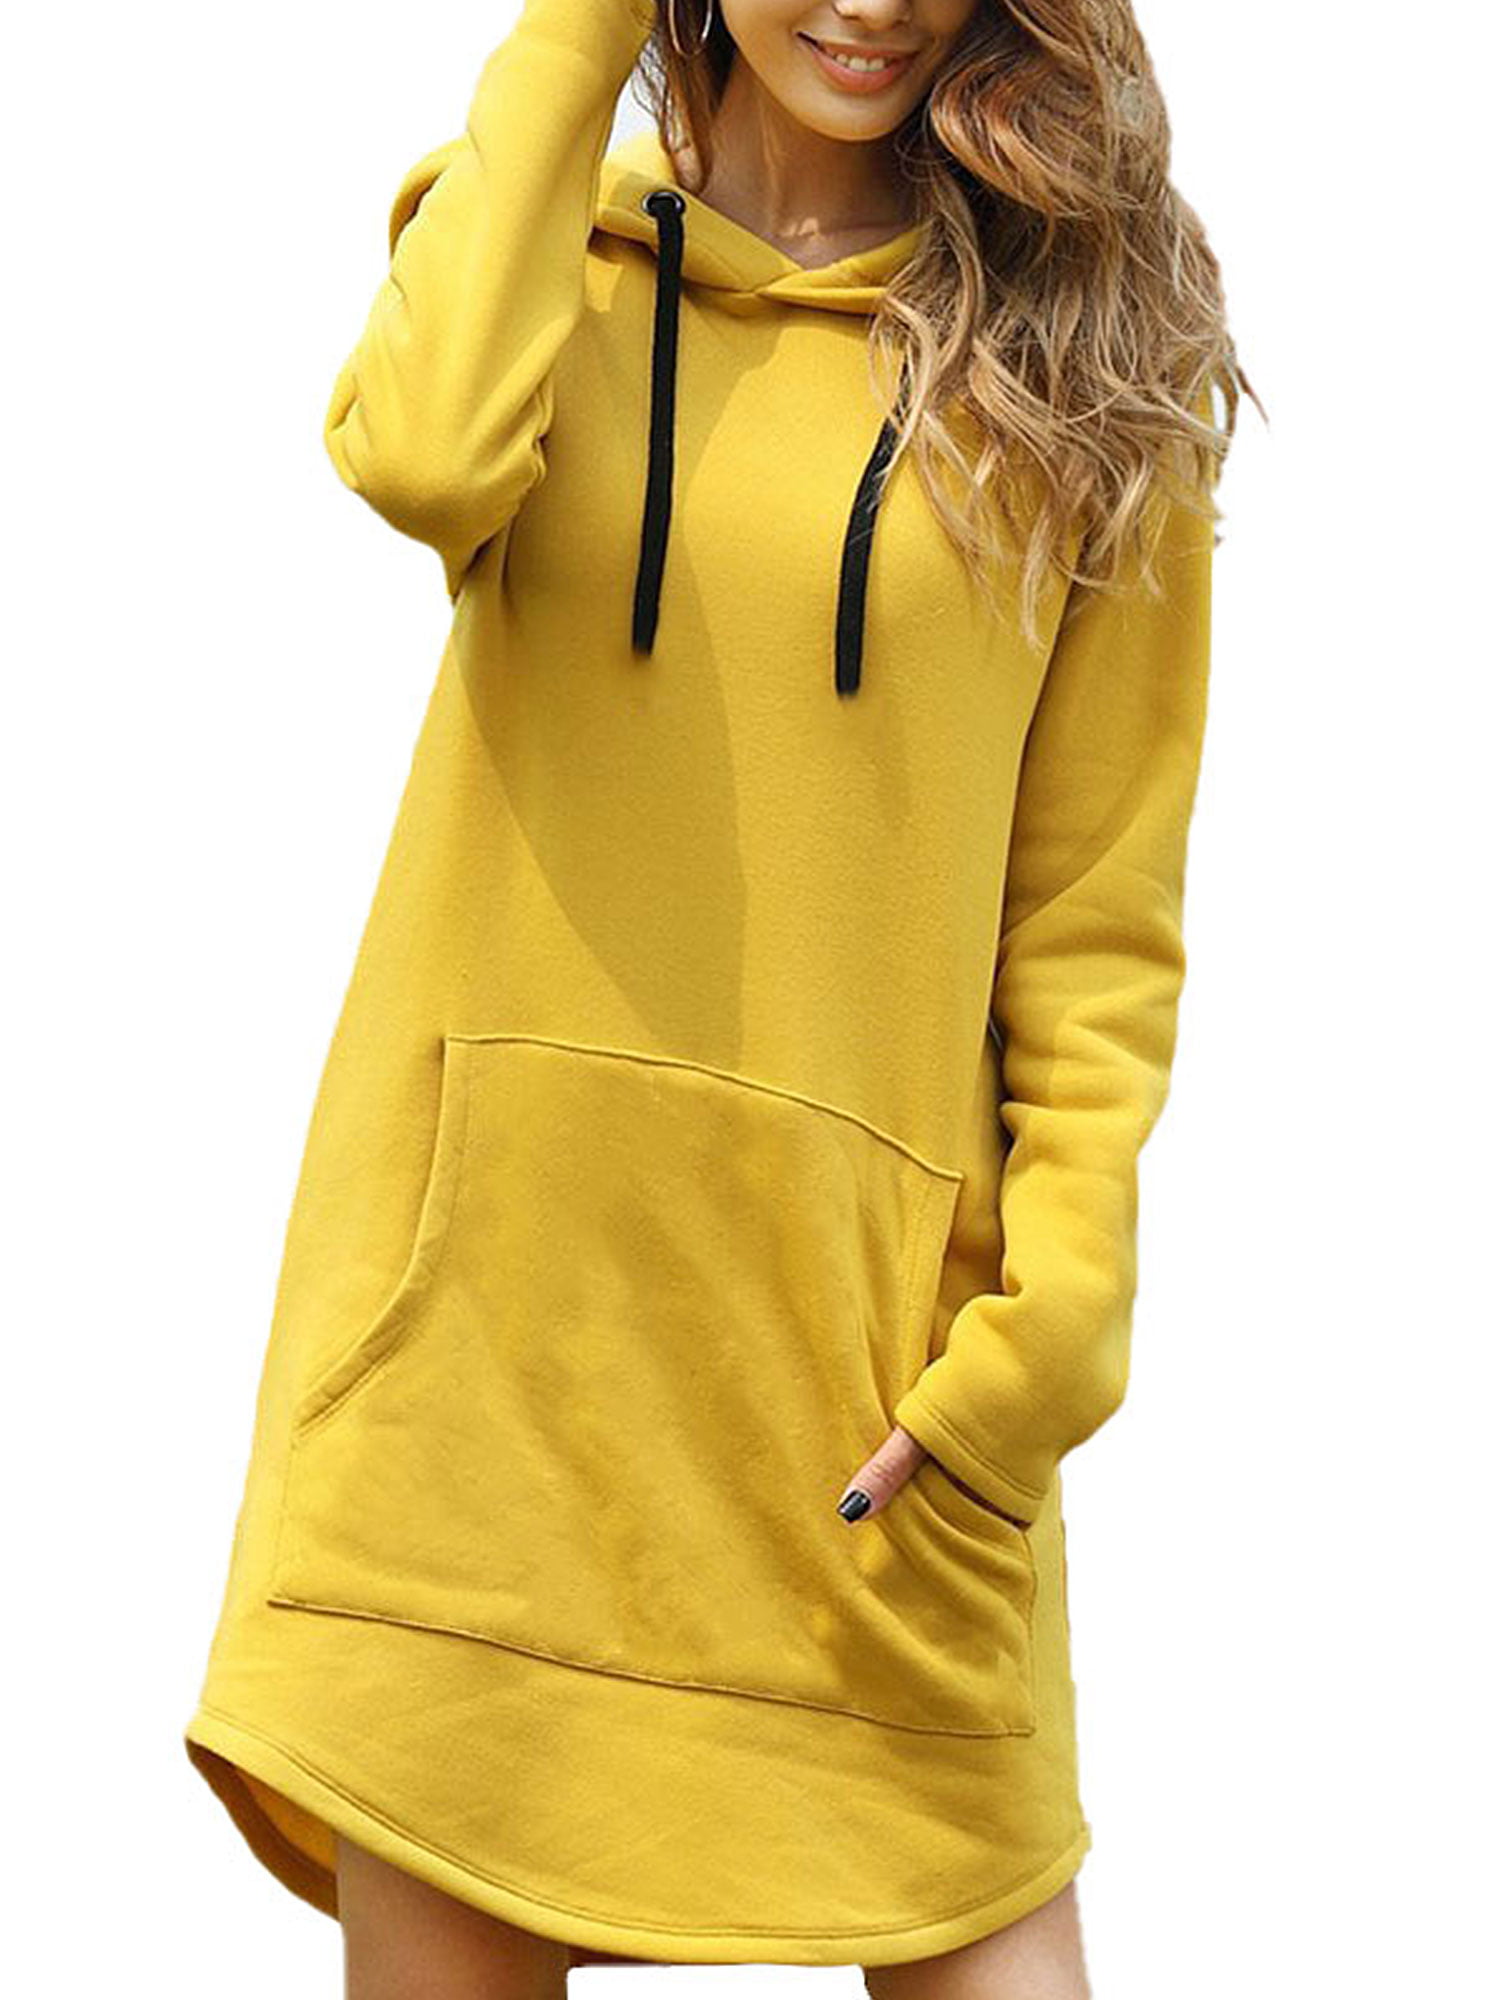 Womens Long Sleeve Hooded Anything Once Loose Casual Pullover Hoodie Dress Tunic Sweatshirt Dress with Pockets